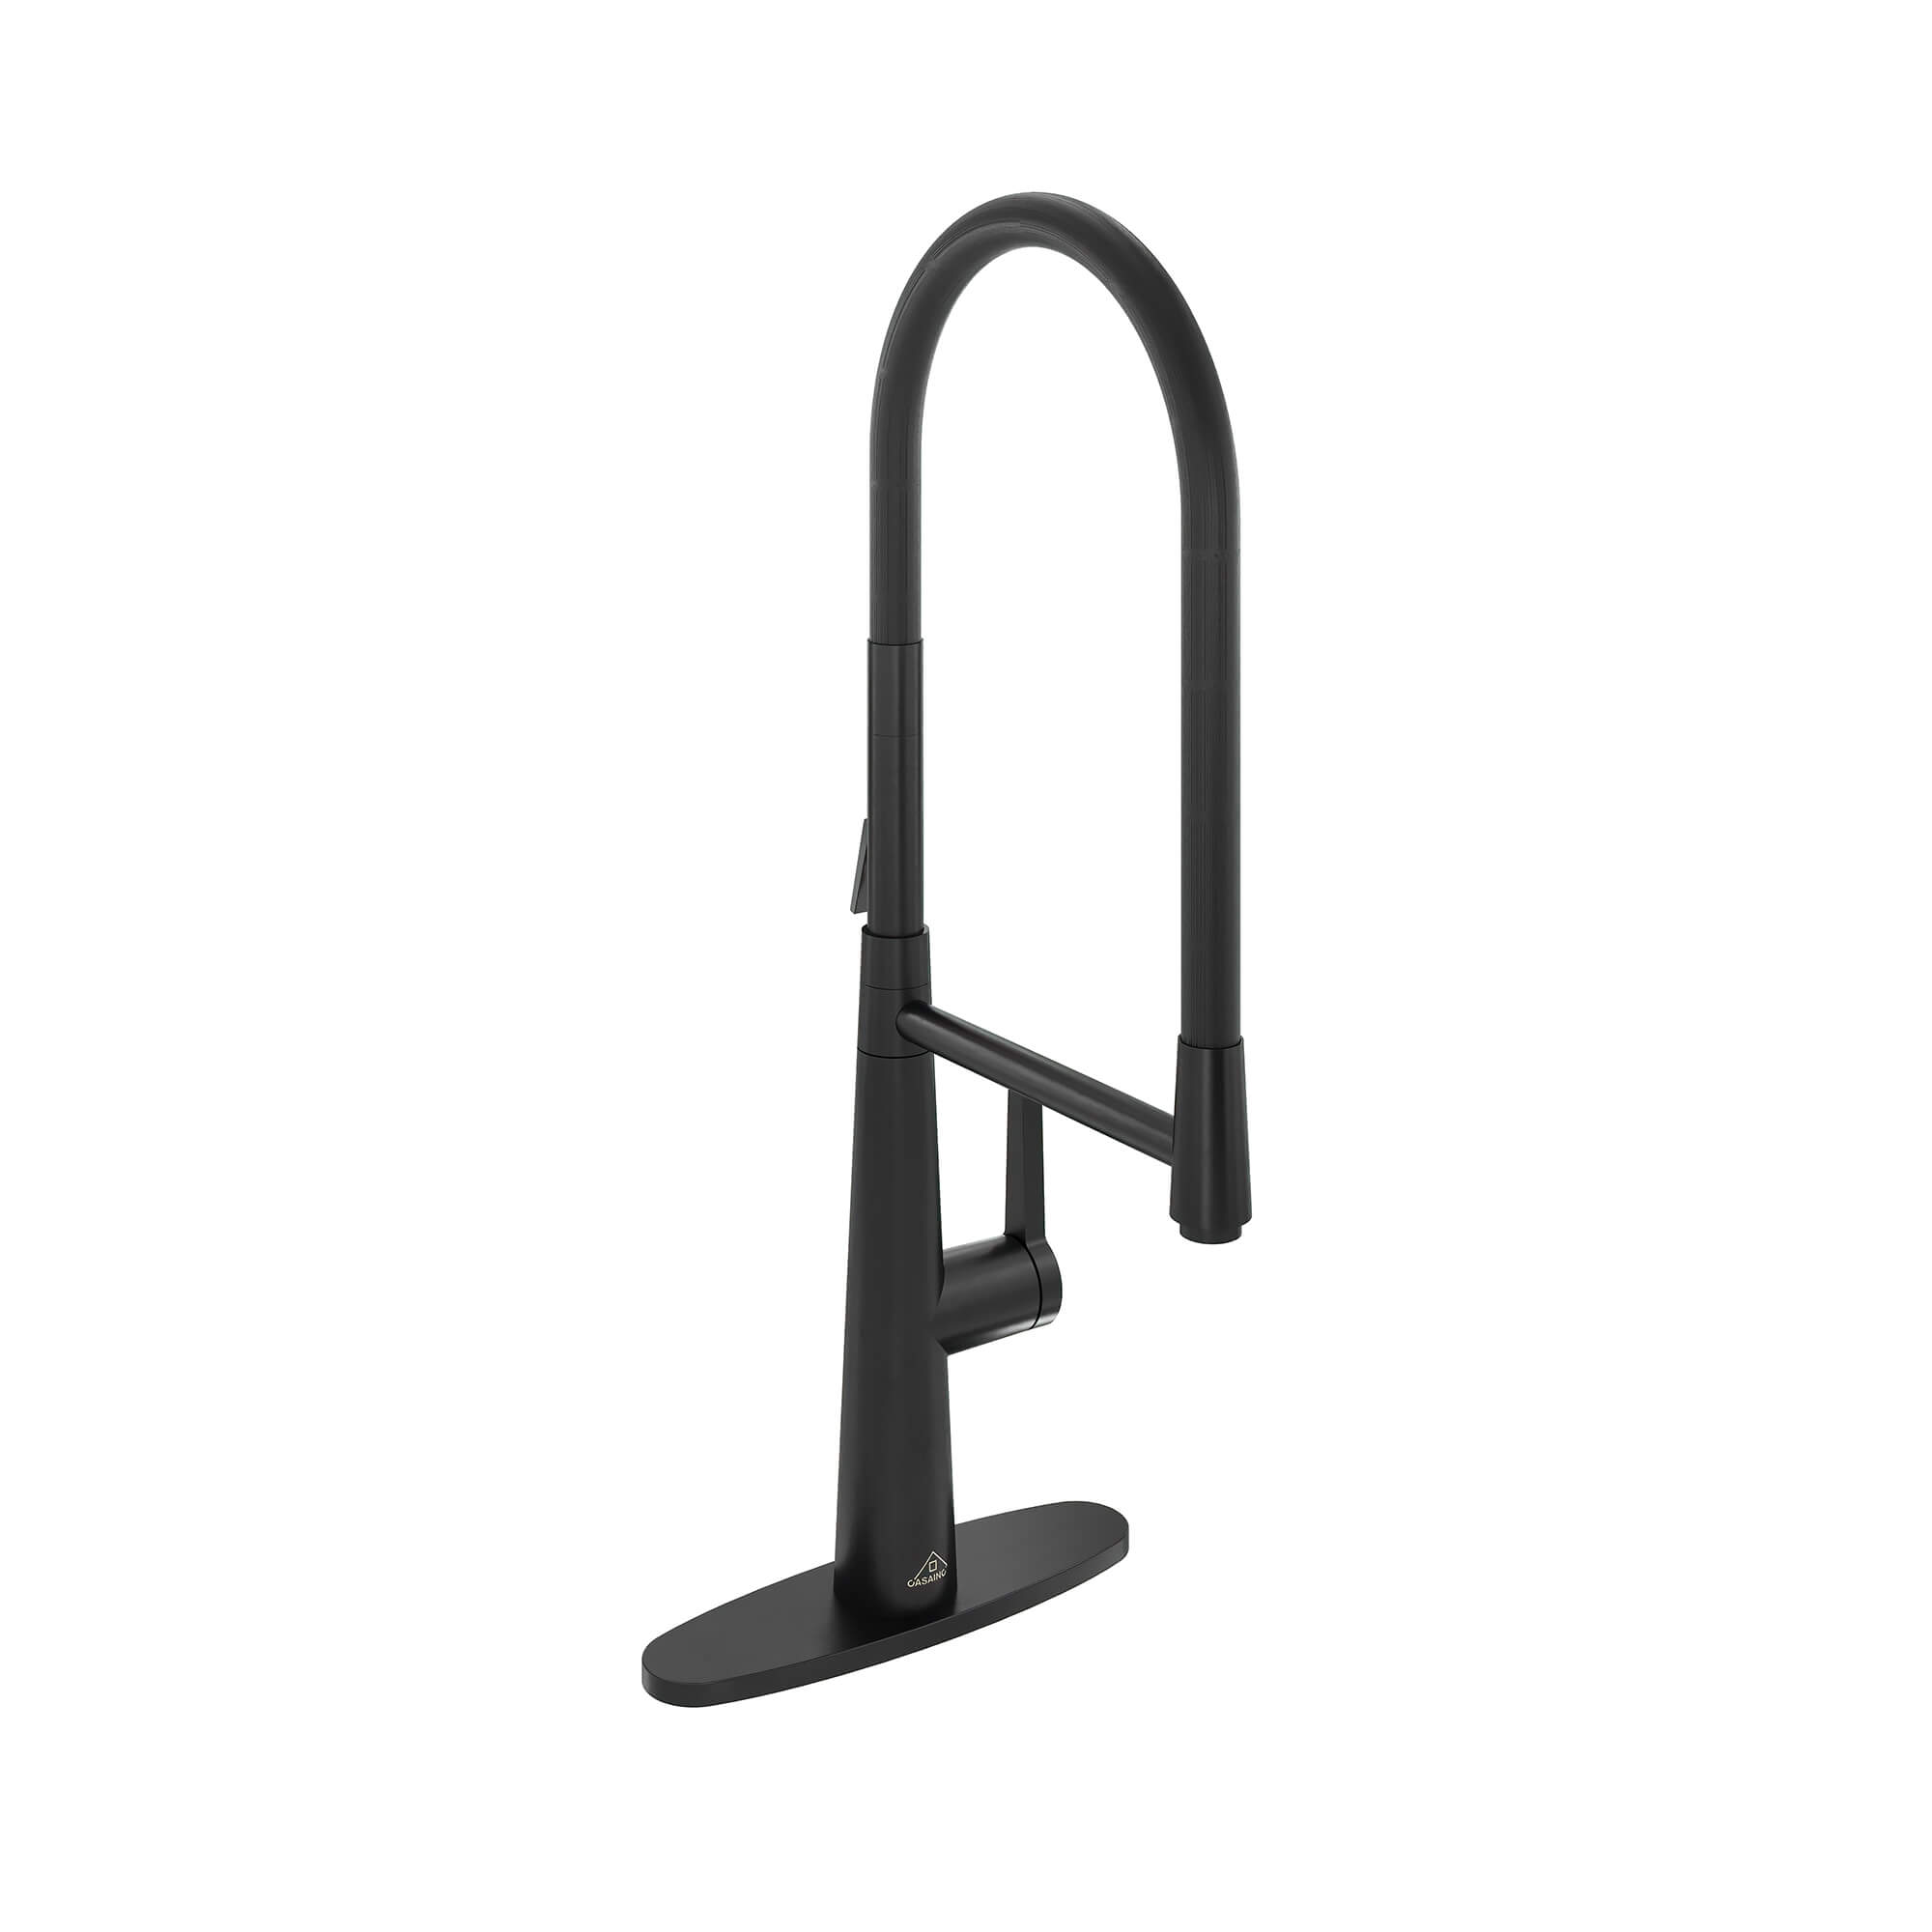 CASAINC 1.8GPM Silicone Kitchen Faucet in Brushed Nickel and More-CASAINC